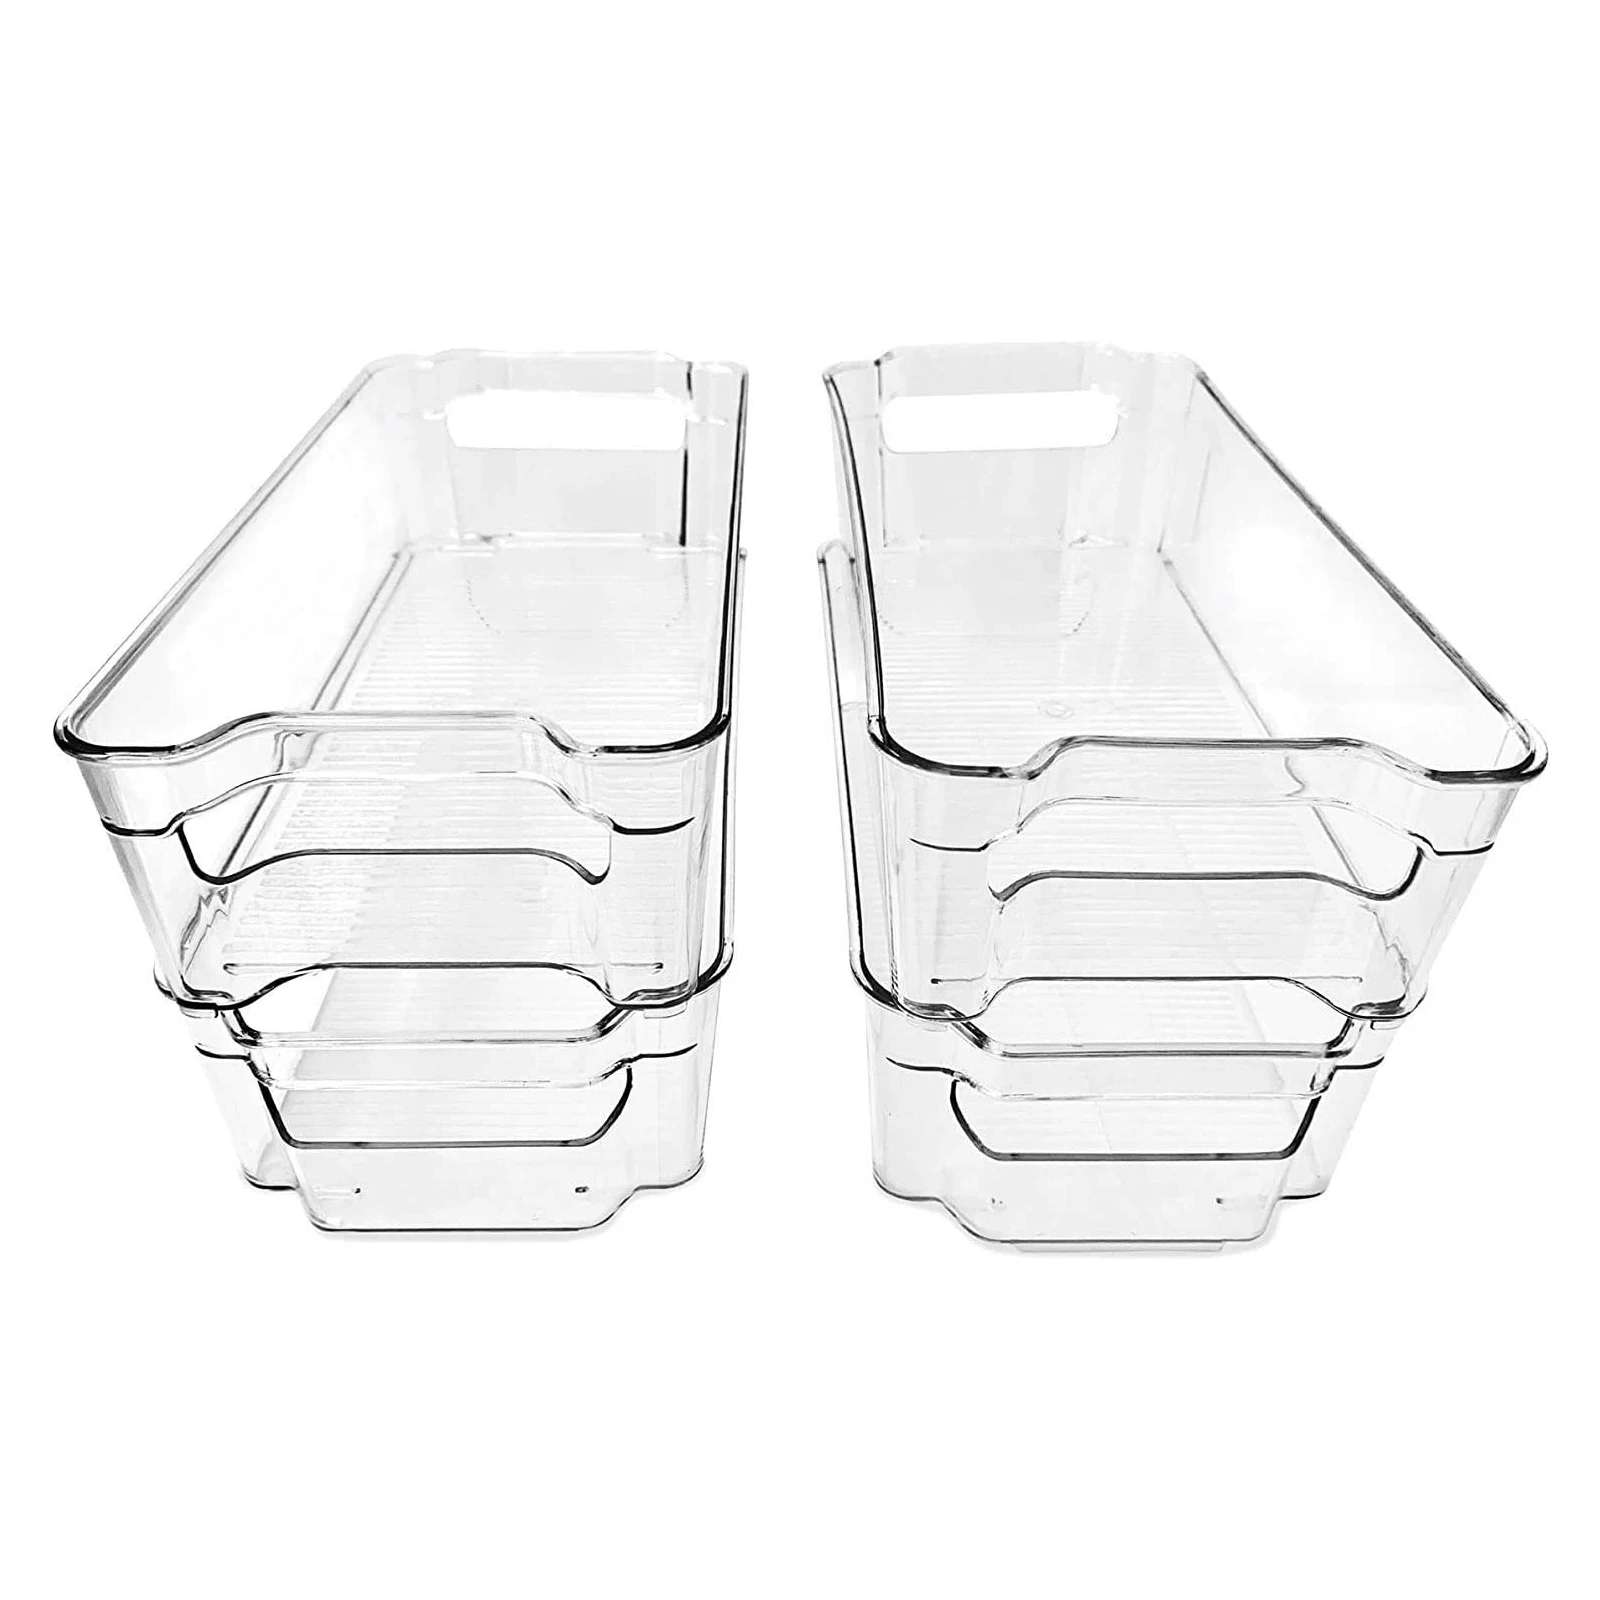 

4 Pack Clear BPA FREE Fridge and Freezer Containers Stackable Food Bins Cabinet Storage Refrigerator Organizer Bins with Handles